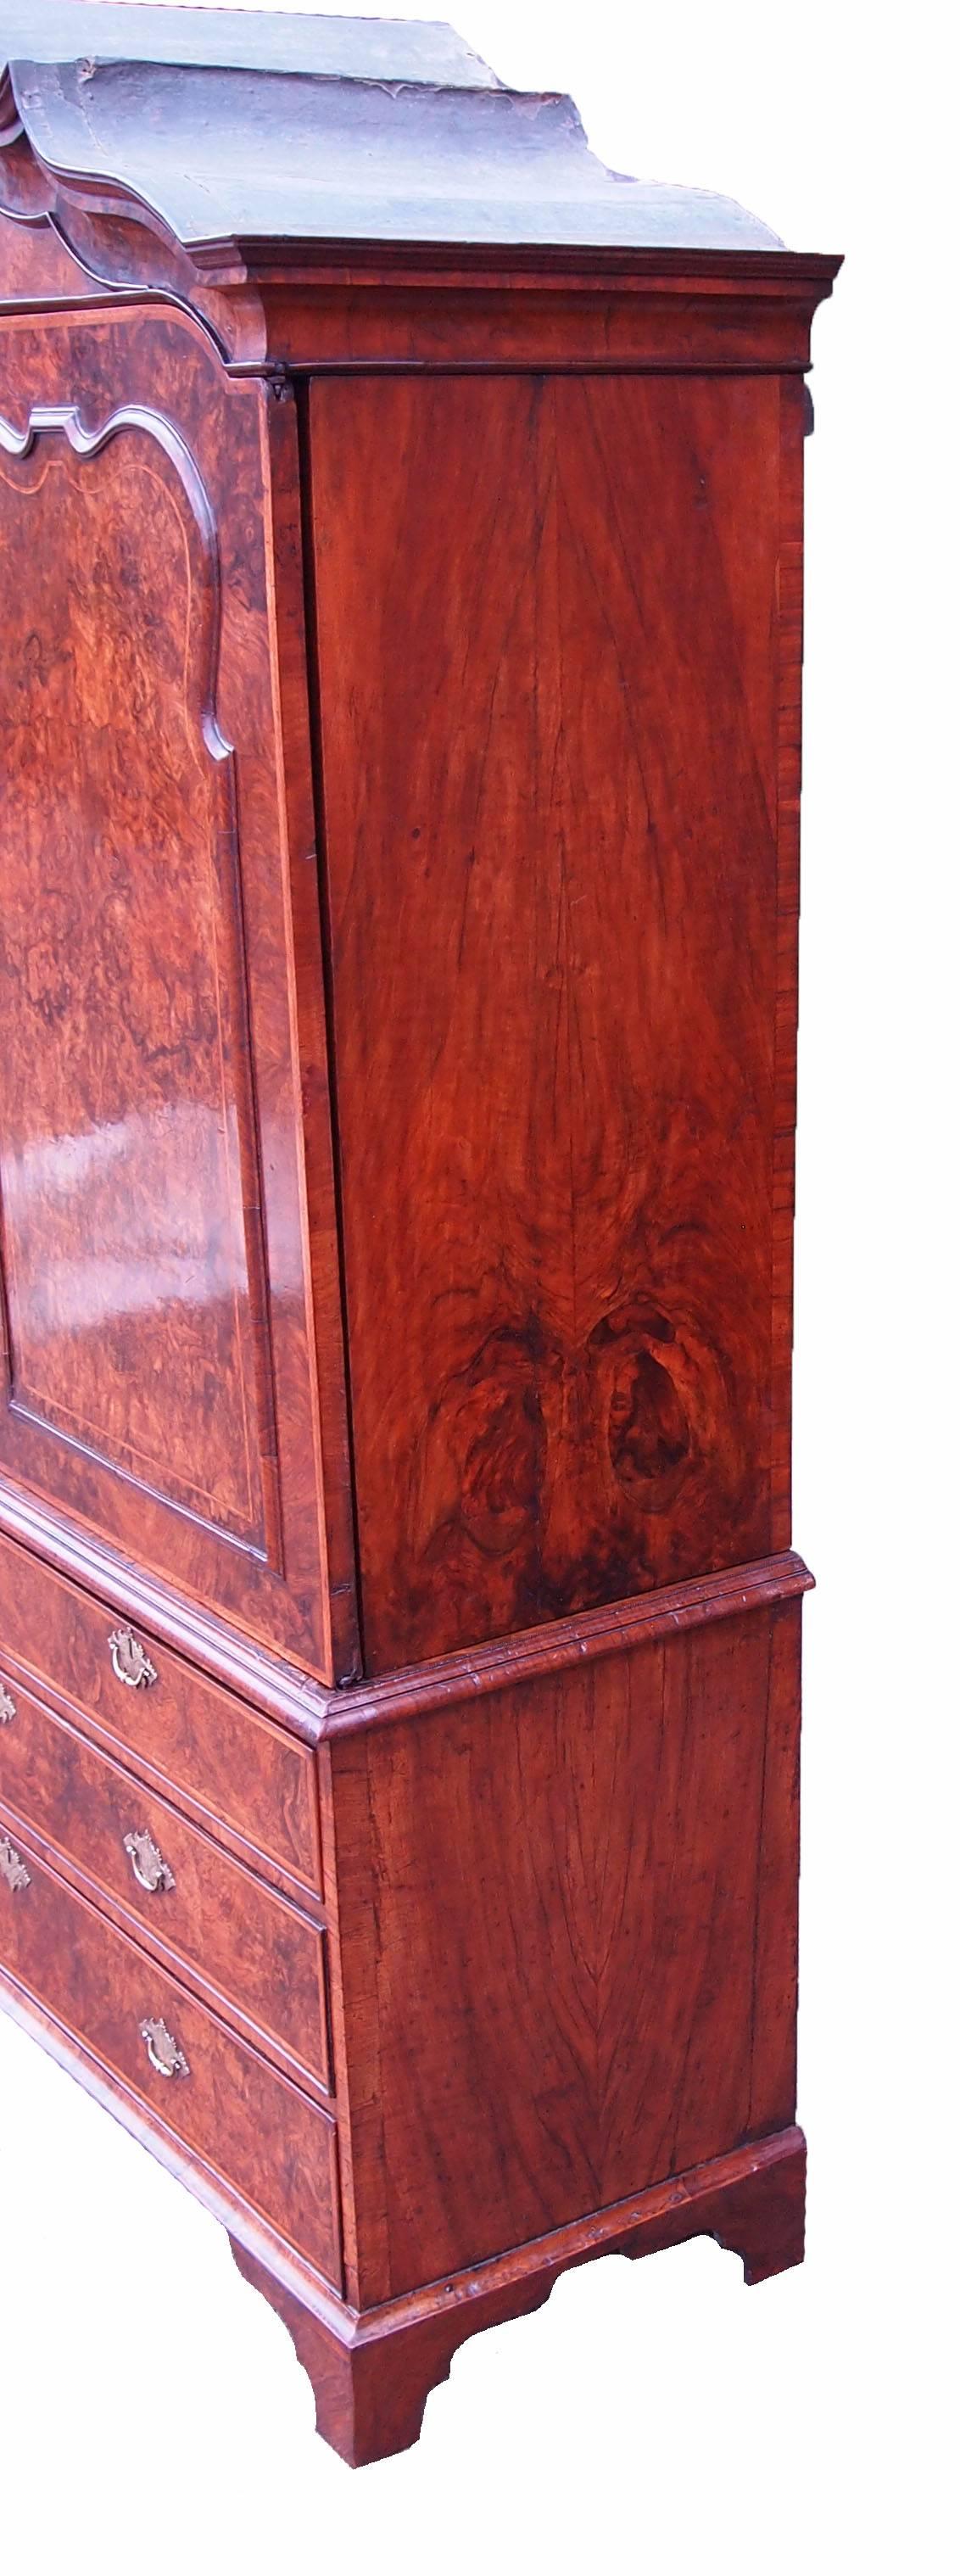 A magnificent and rare early 18th century burr walnut linen press cupboard
Having shaped canopy cornice above two superbly figured panelled doors
Above two short and two long drawers with replacement brass handles
Raised on original shaped